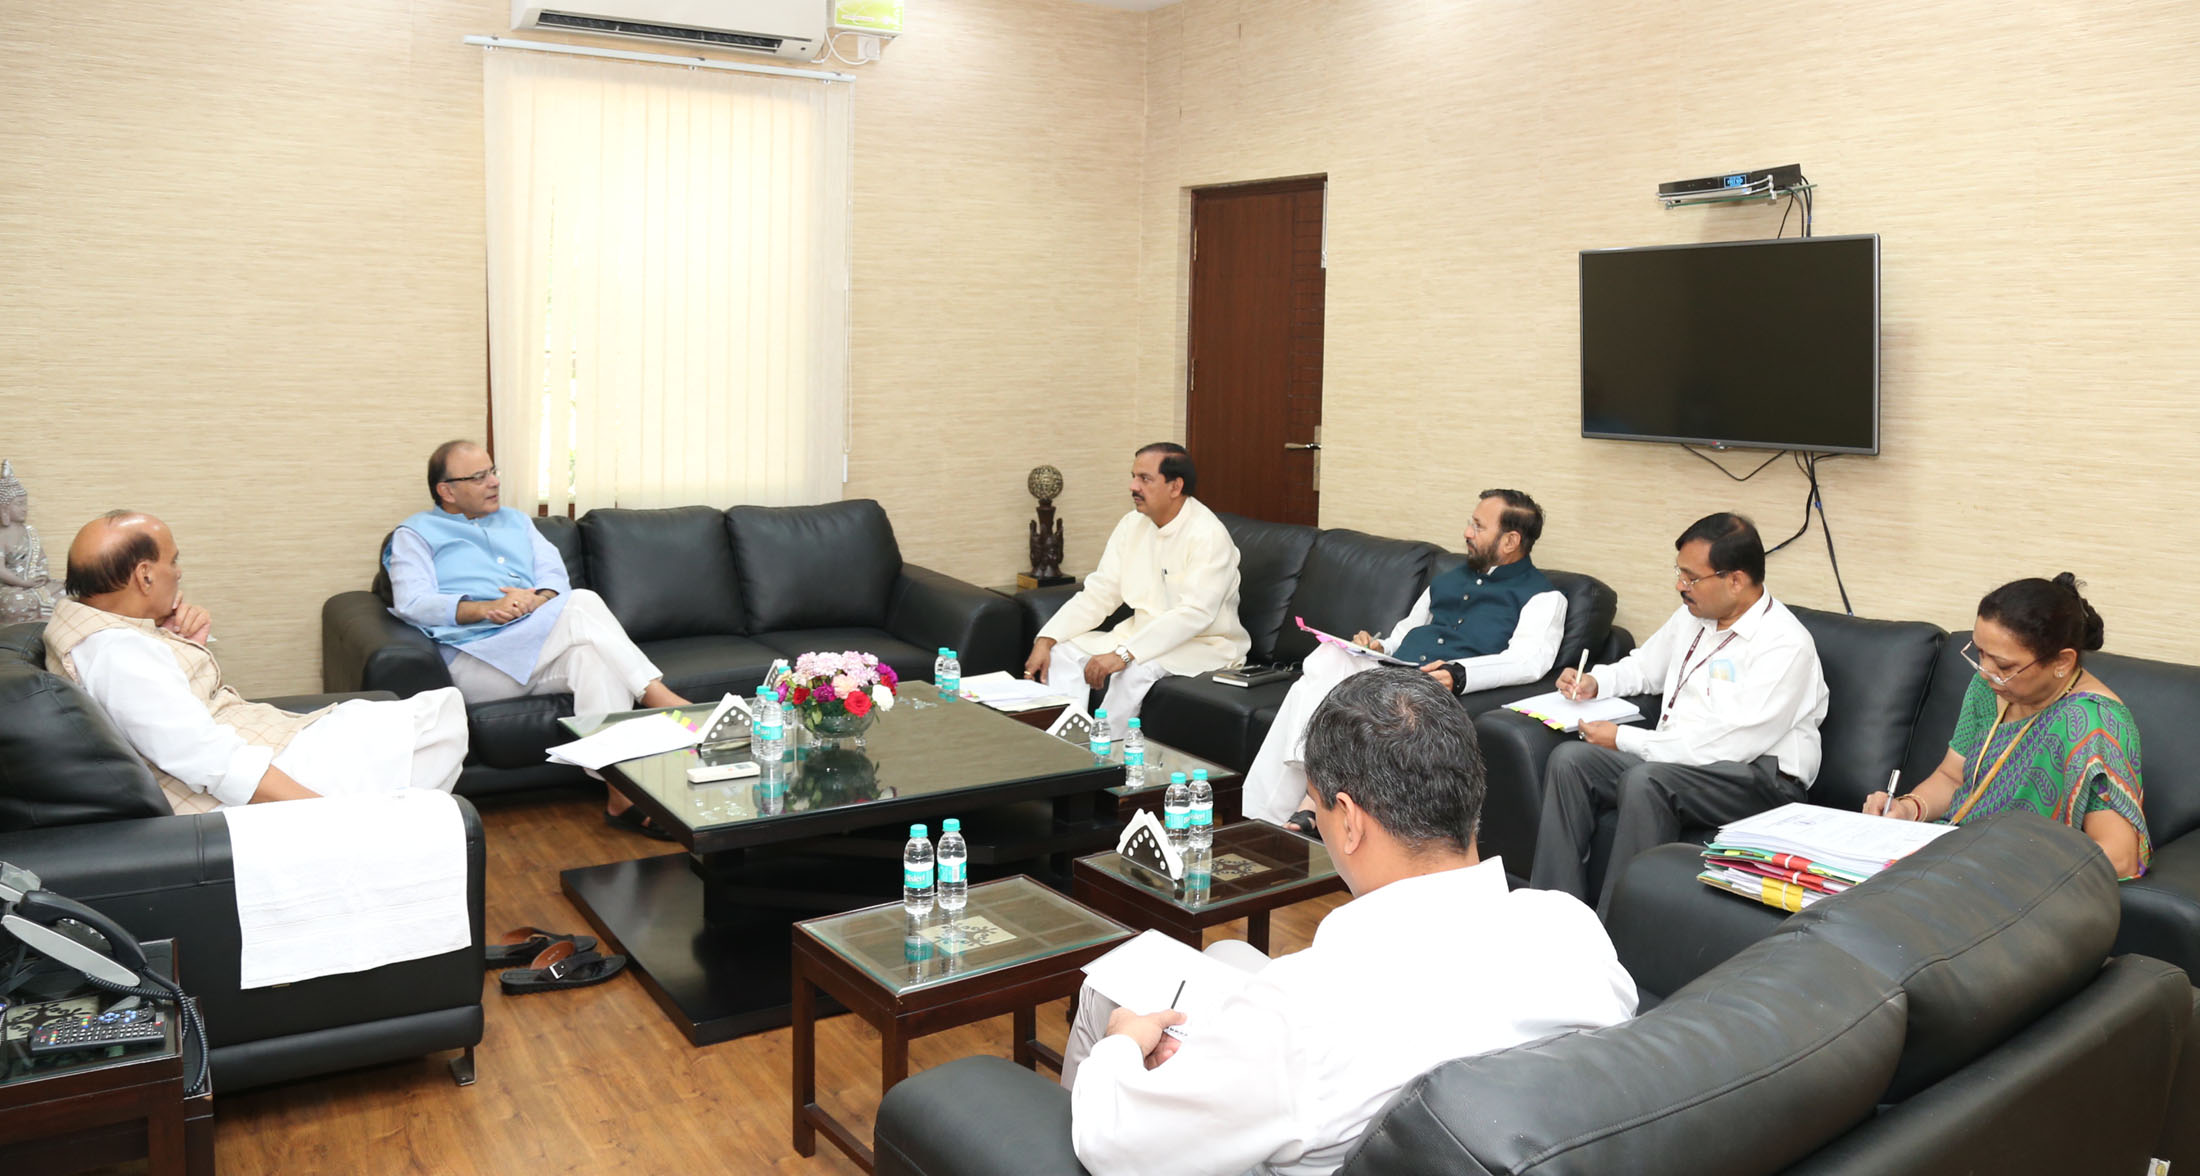 The Union Home Minister Shri Rajnath Singh Chairing A Meeting Of